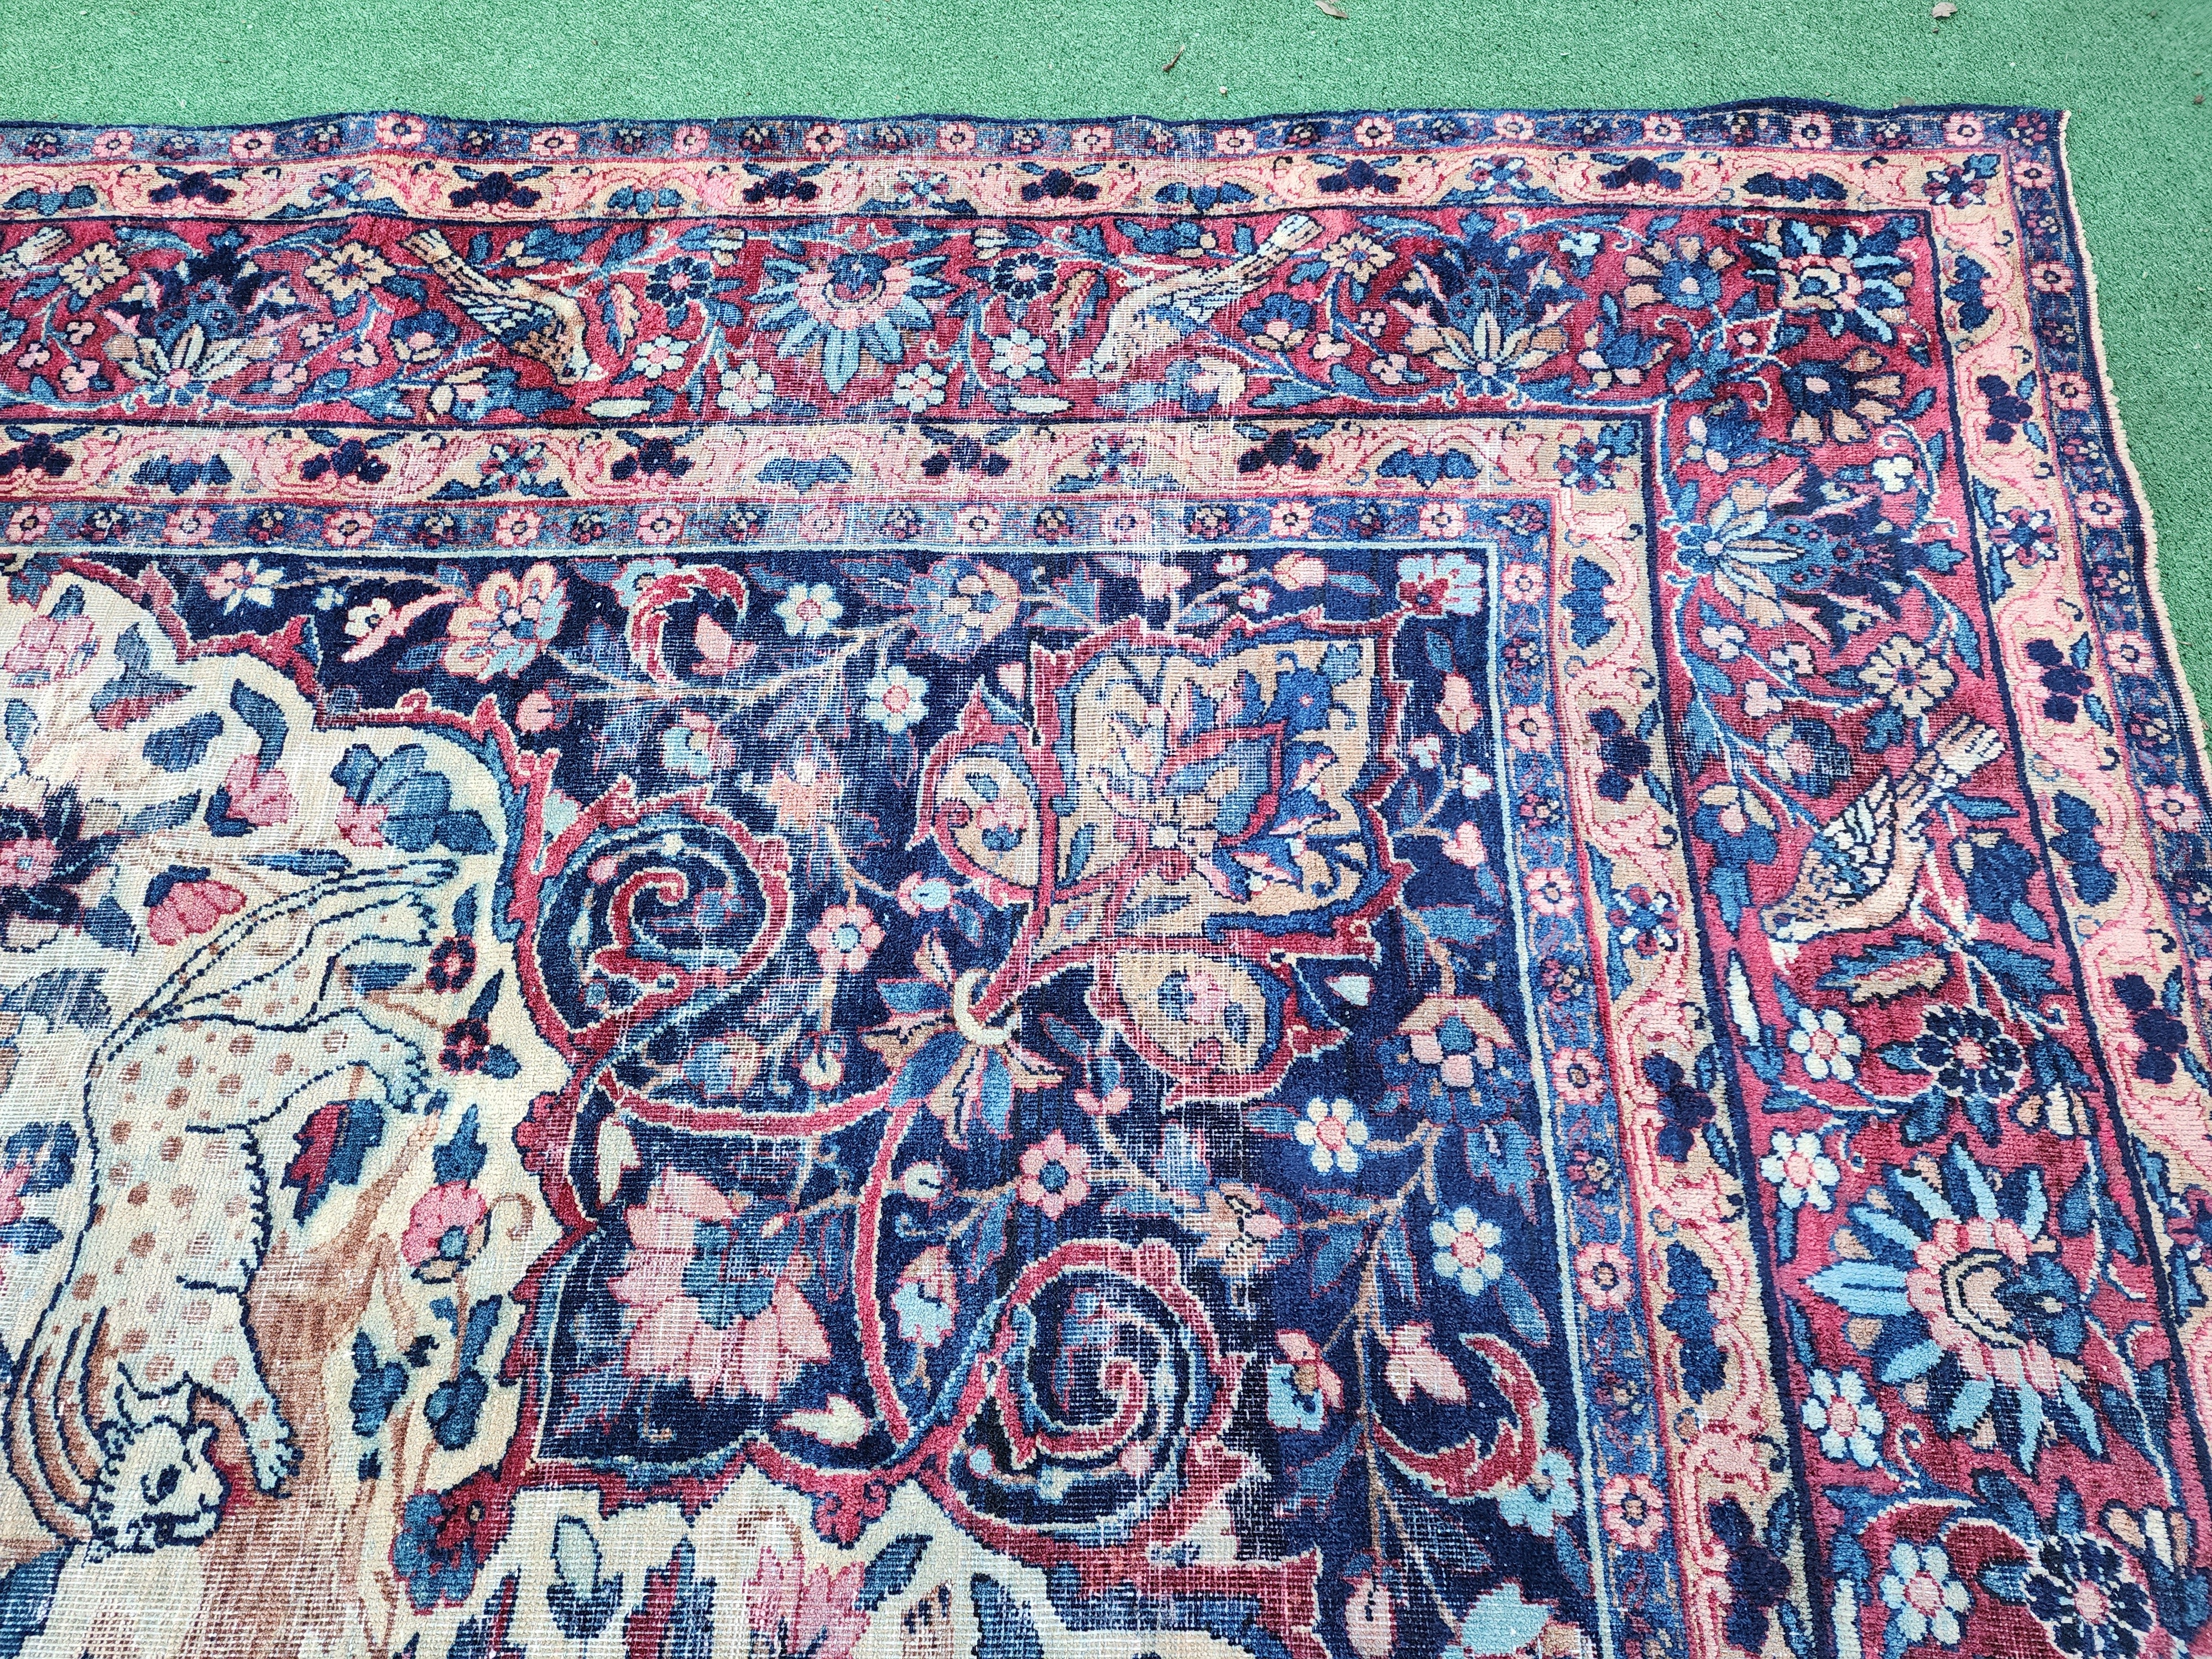 Antique Persian Rug, 11 ft x 8 ft, X Large Blue. Red and White Floral Medallion Turkish Rug Handmade from Natural Wool